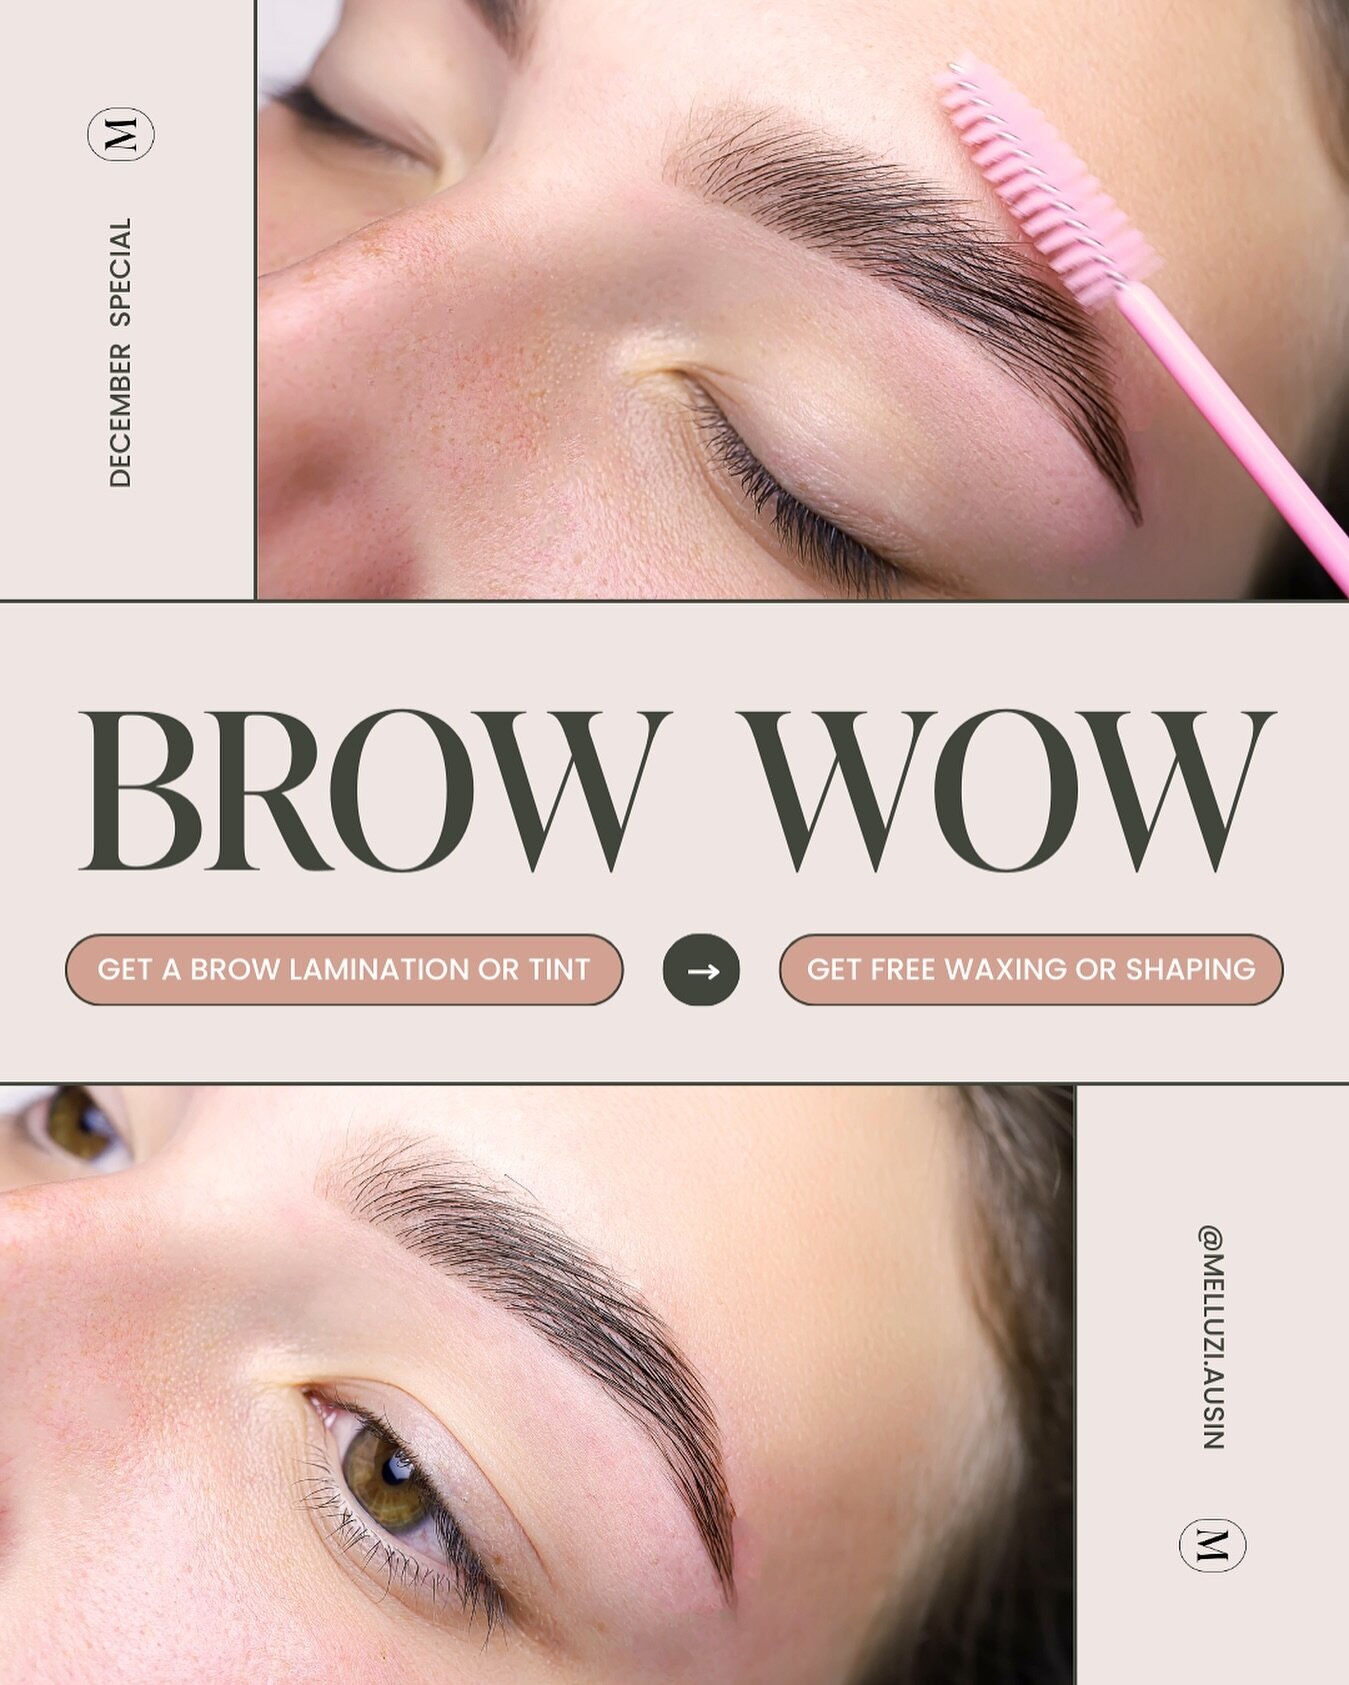 Save on your brow maintenance this month at Melluzi Austin ✨

Book a brow lamination or tint + get free brow wax/shaping - tap the link in our bio to book now.